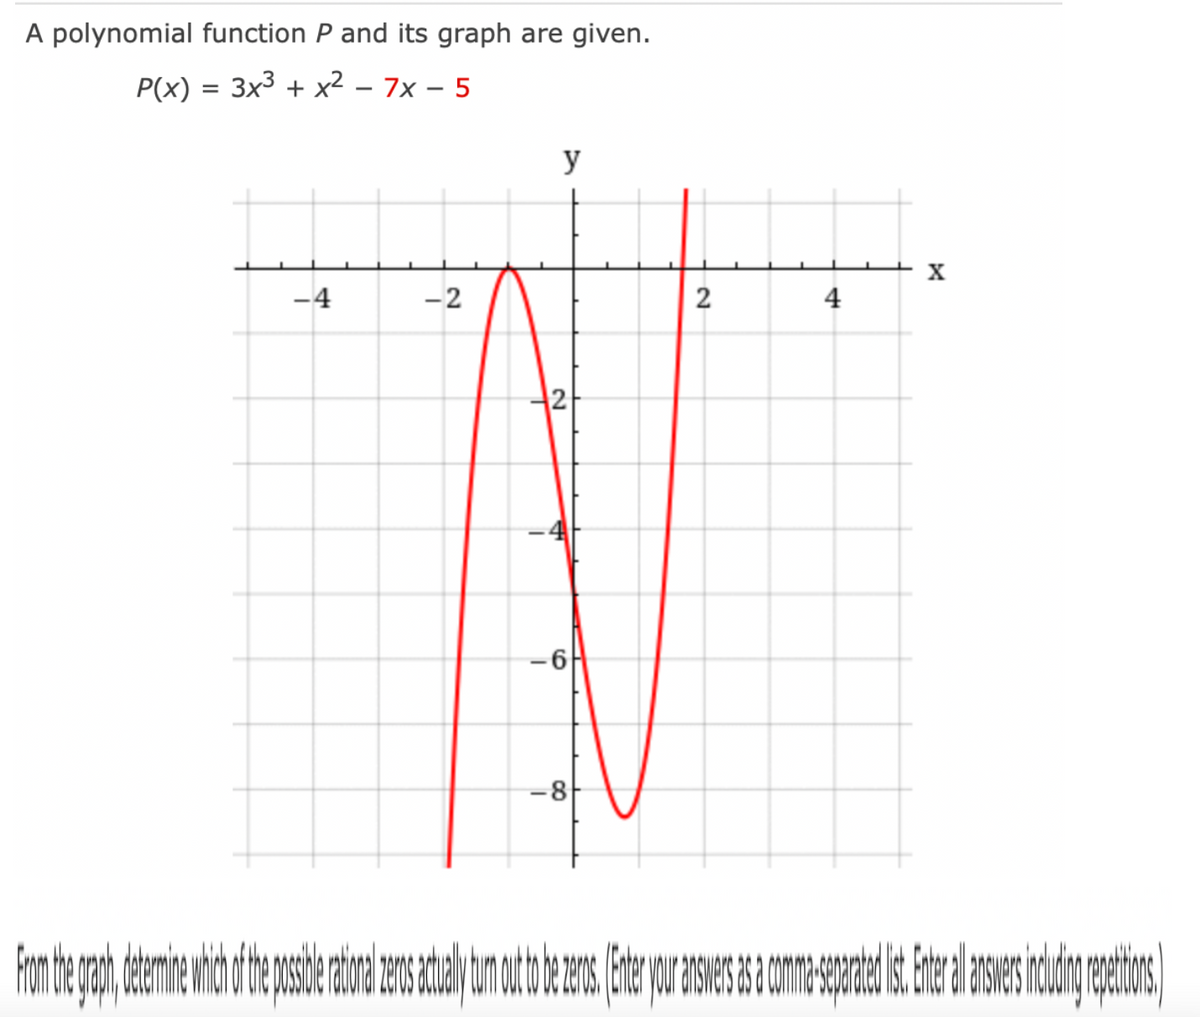 A polynomial function P and its graph are given.
P(x) = 3x³ + x² - 7x - 5
TITI
–4
-2
y
2
-6
-8
2
4
X
from the grate determine which ofthe posterior es adalah oran otot be consulenter para seus as a commerce ed i te al es in die regte